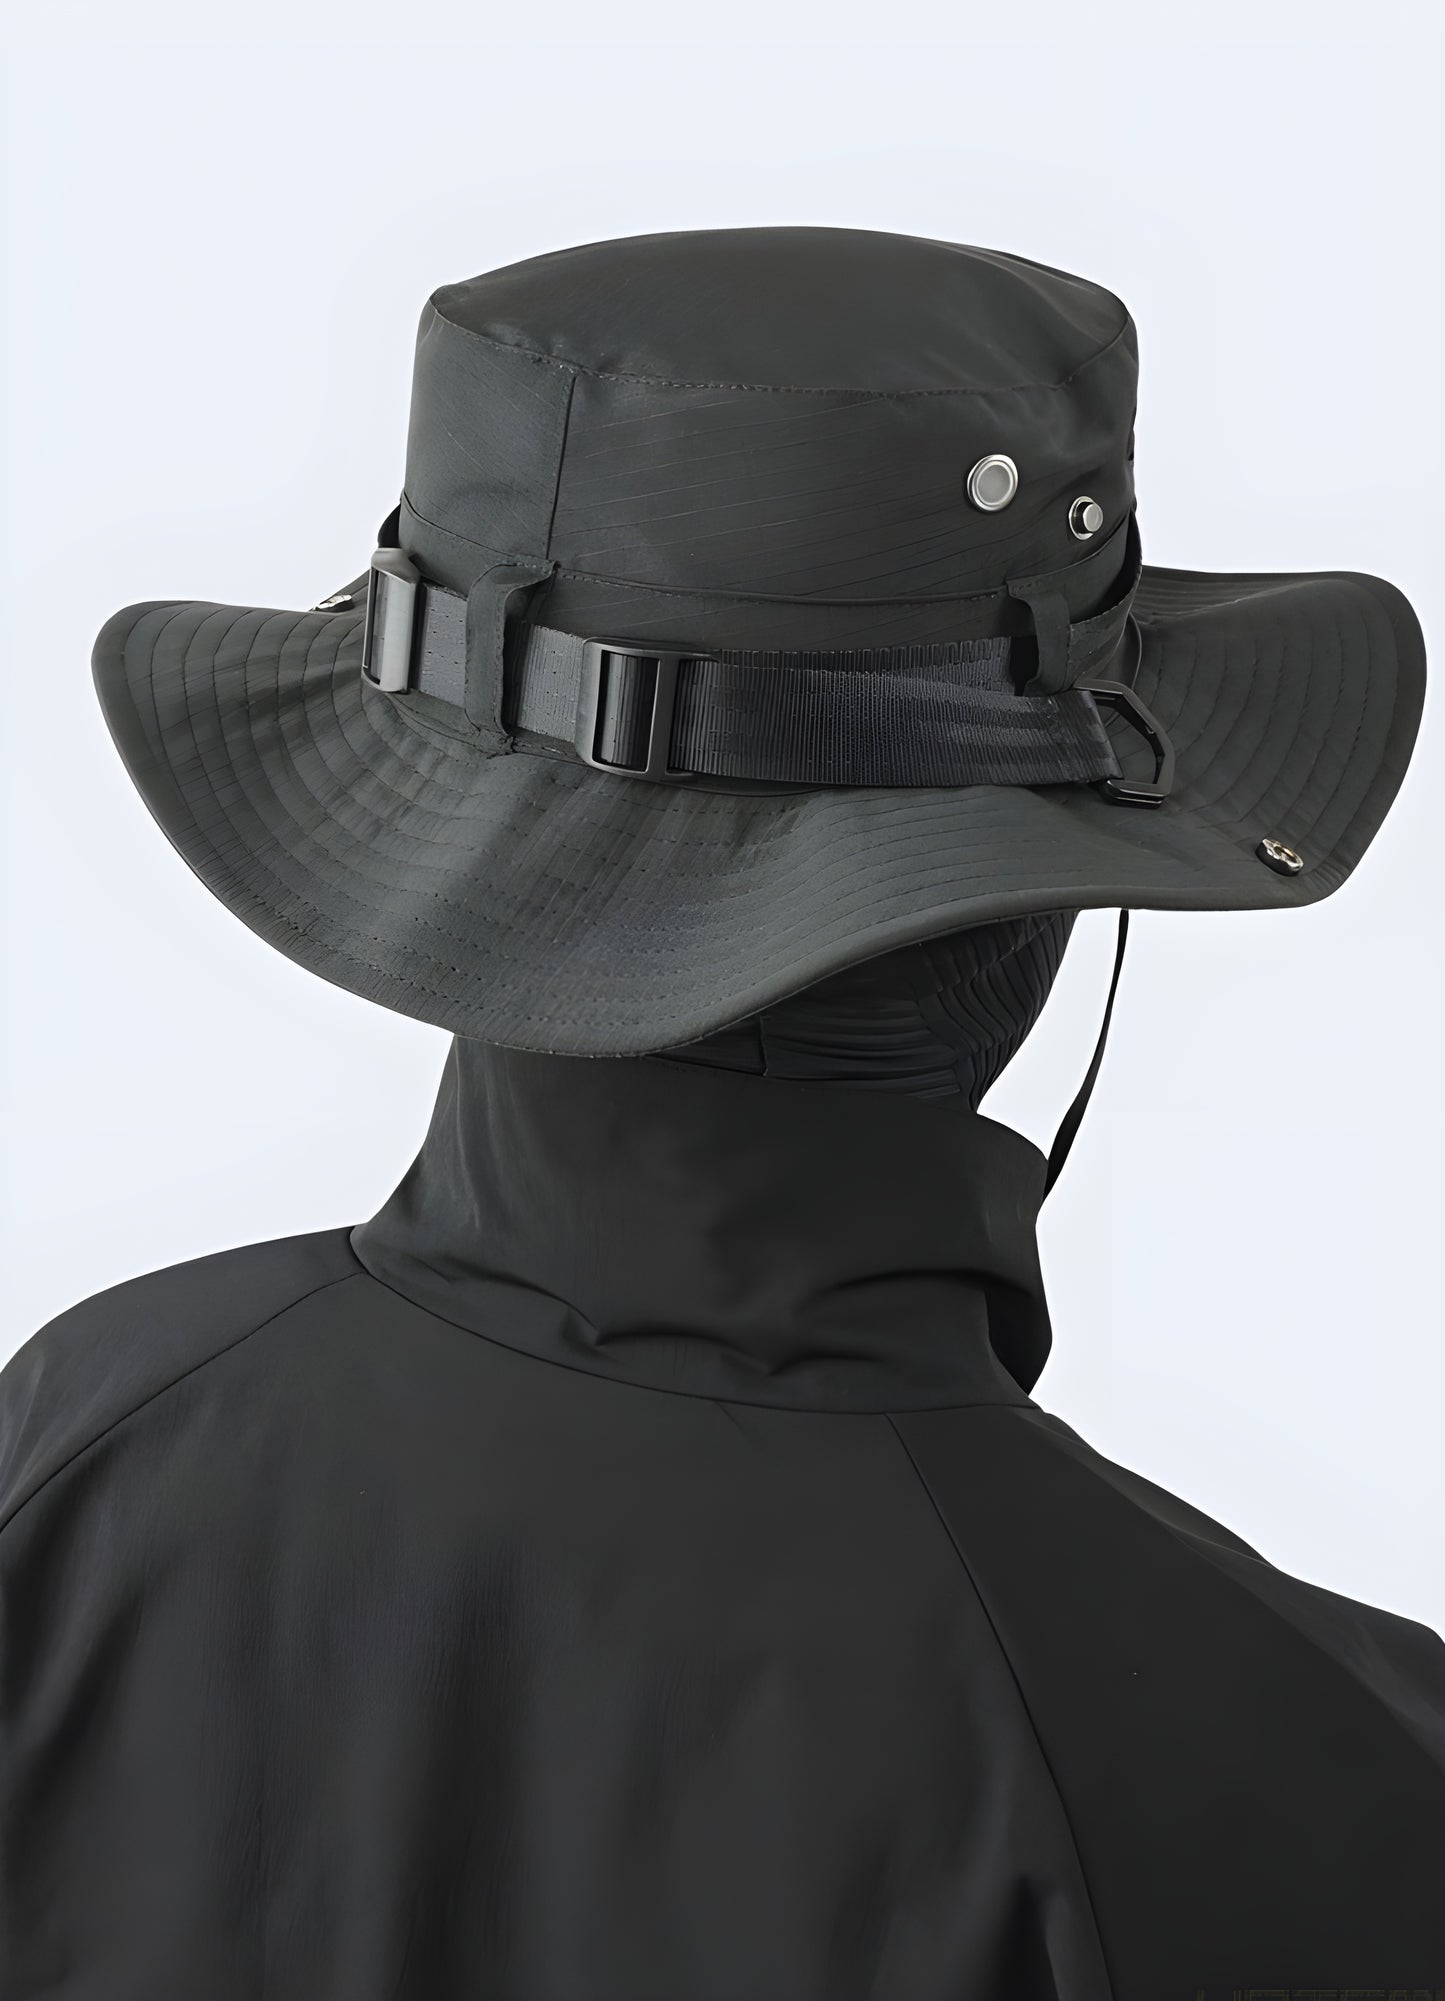 With its sleek elegance and full-black finesse, this army bucket hat shatters the norms of typical, mundane hats.